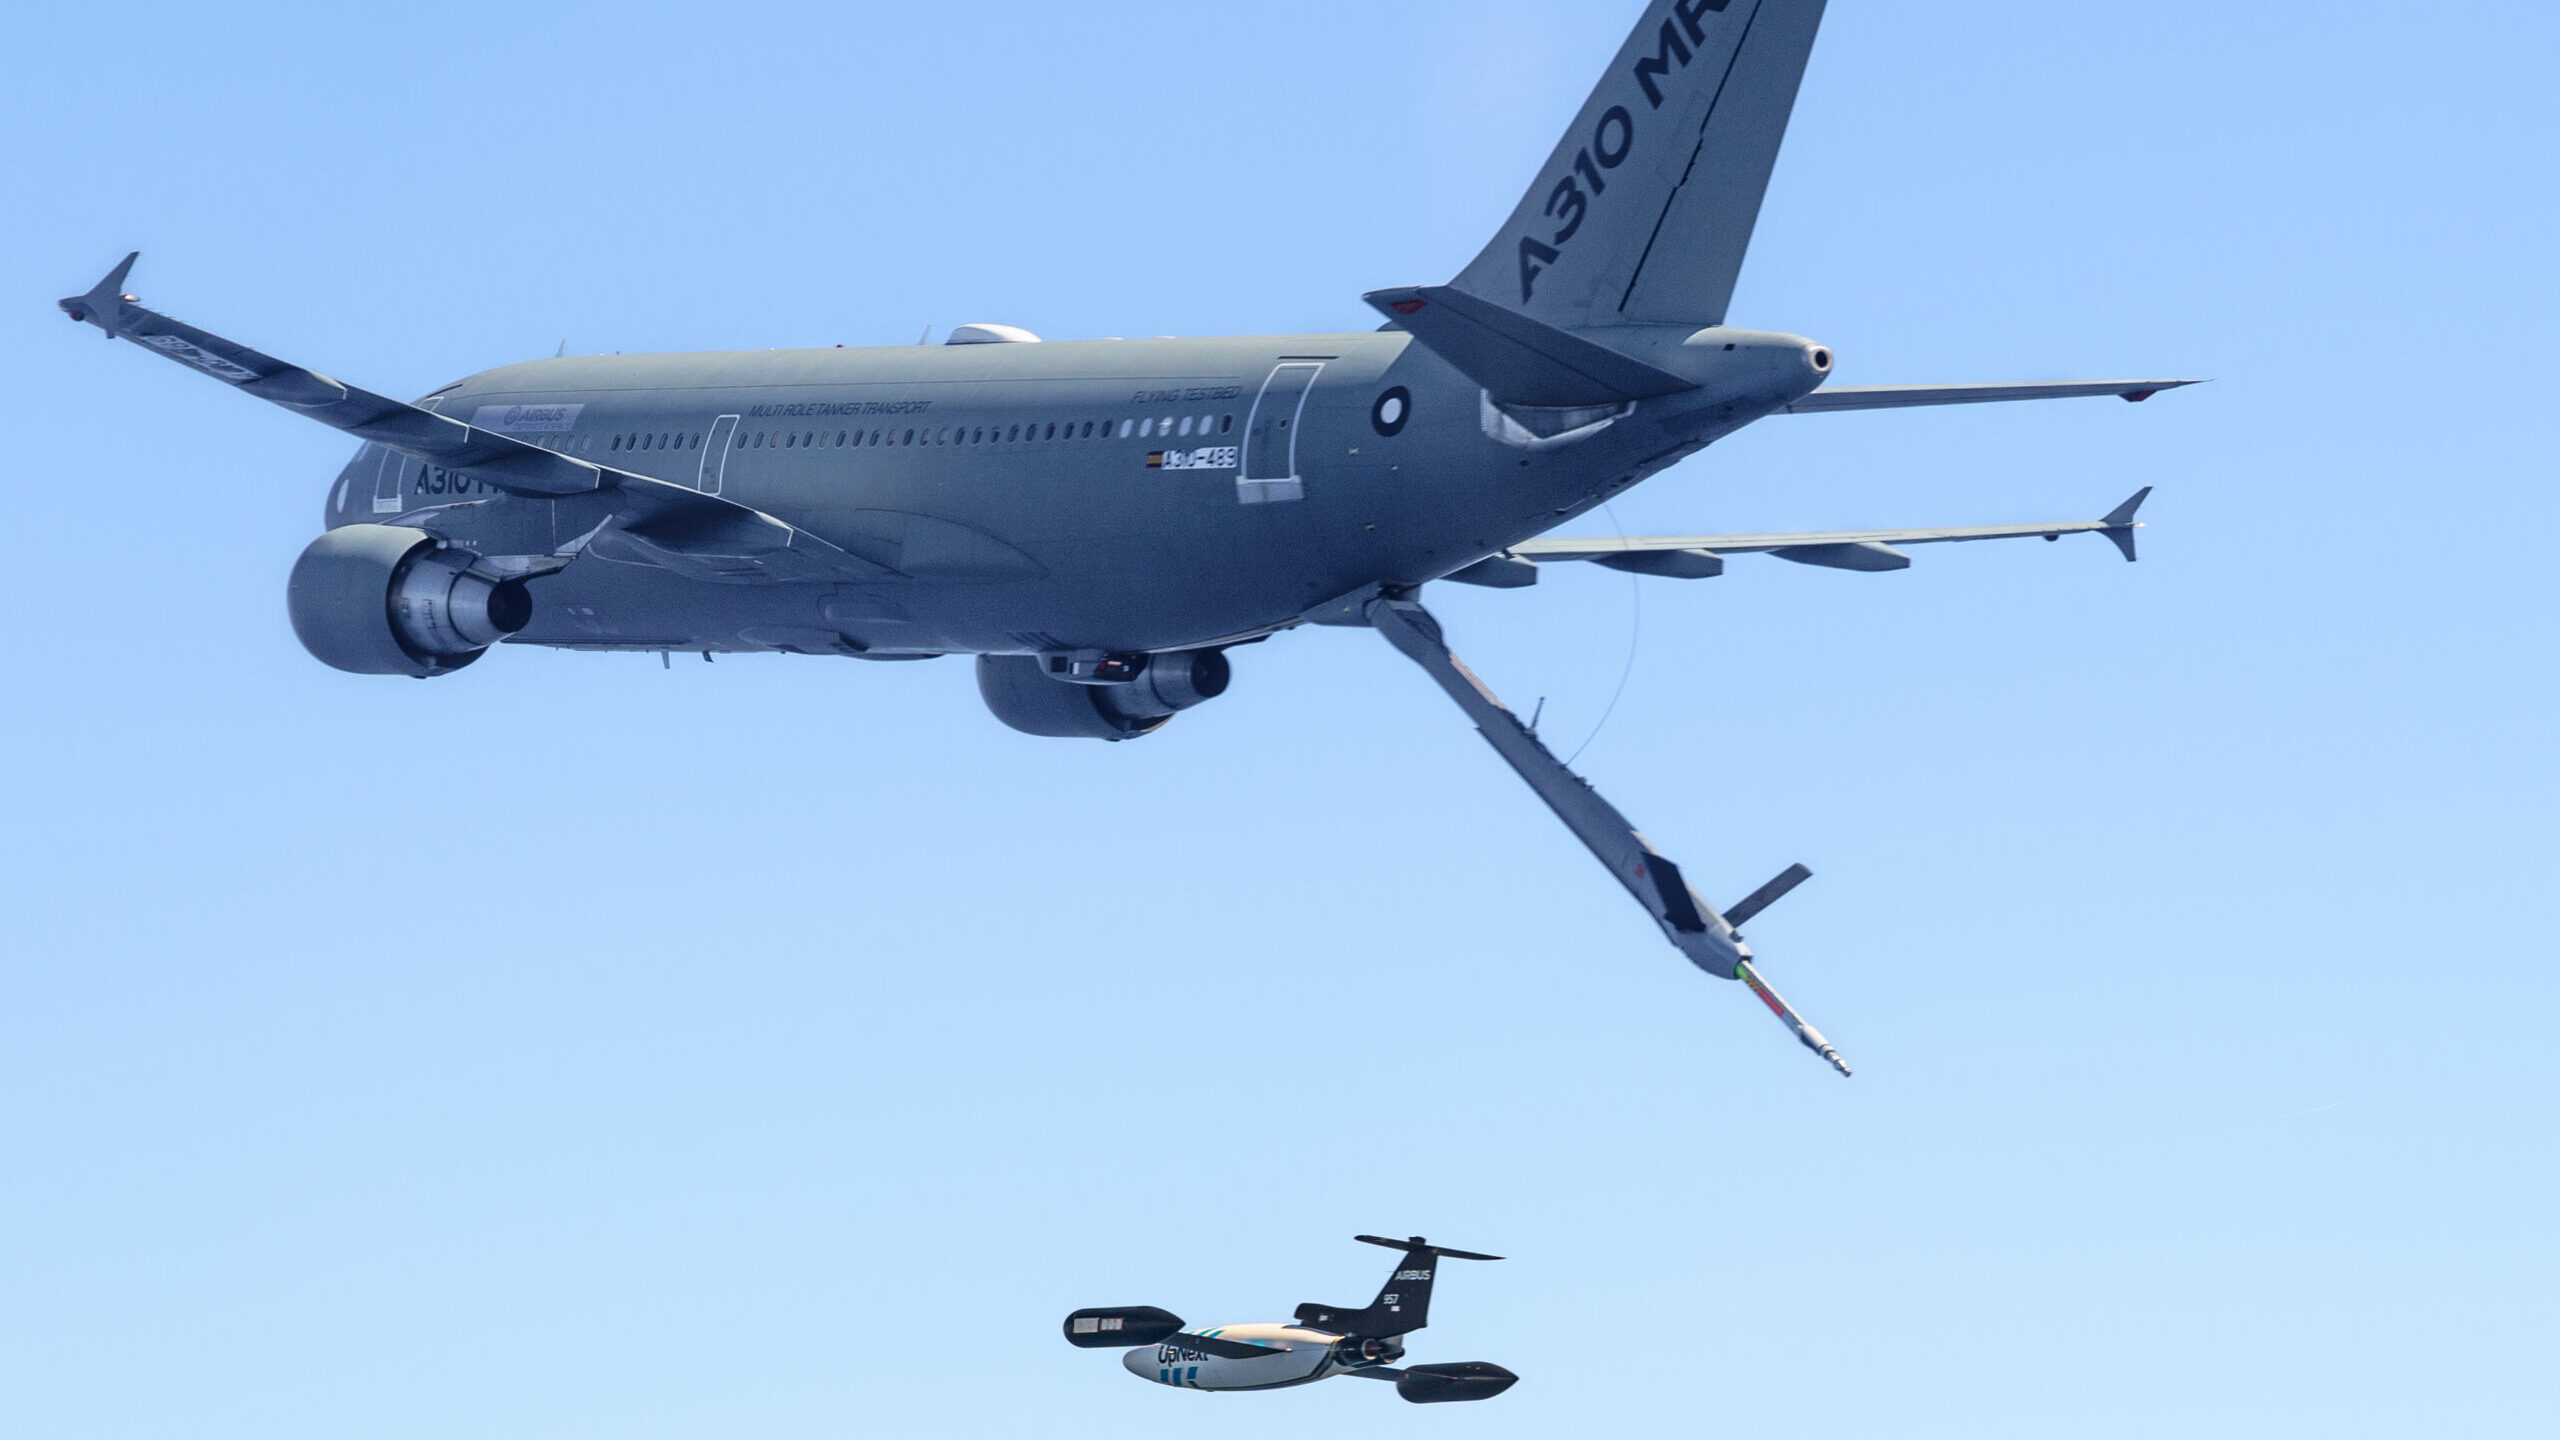 In first, Airbus A310 tanker flight autonomously guides DT-25 drones into mock refueling position